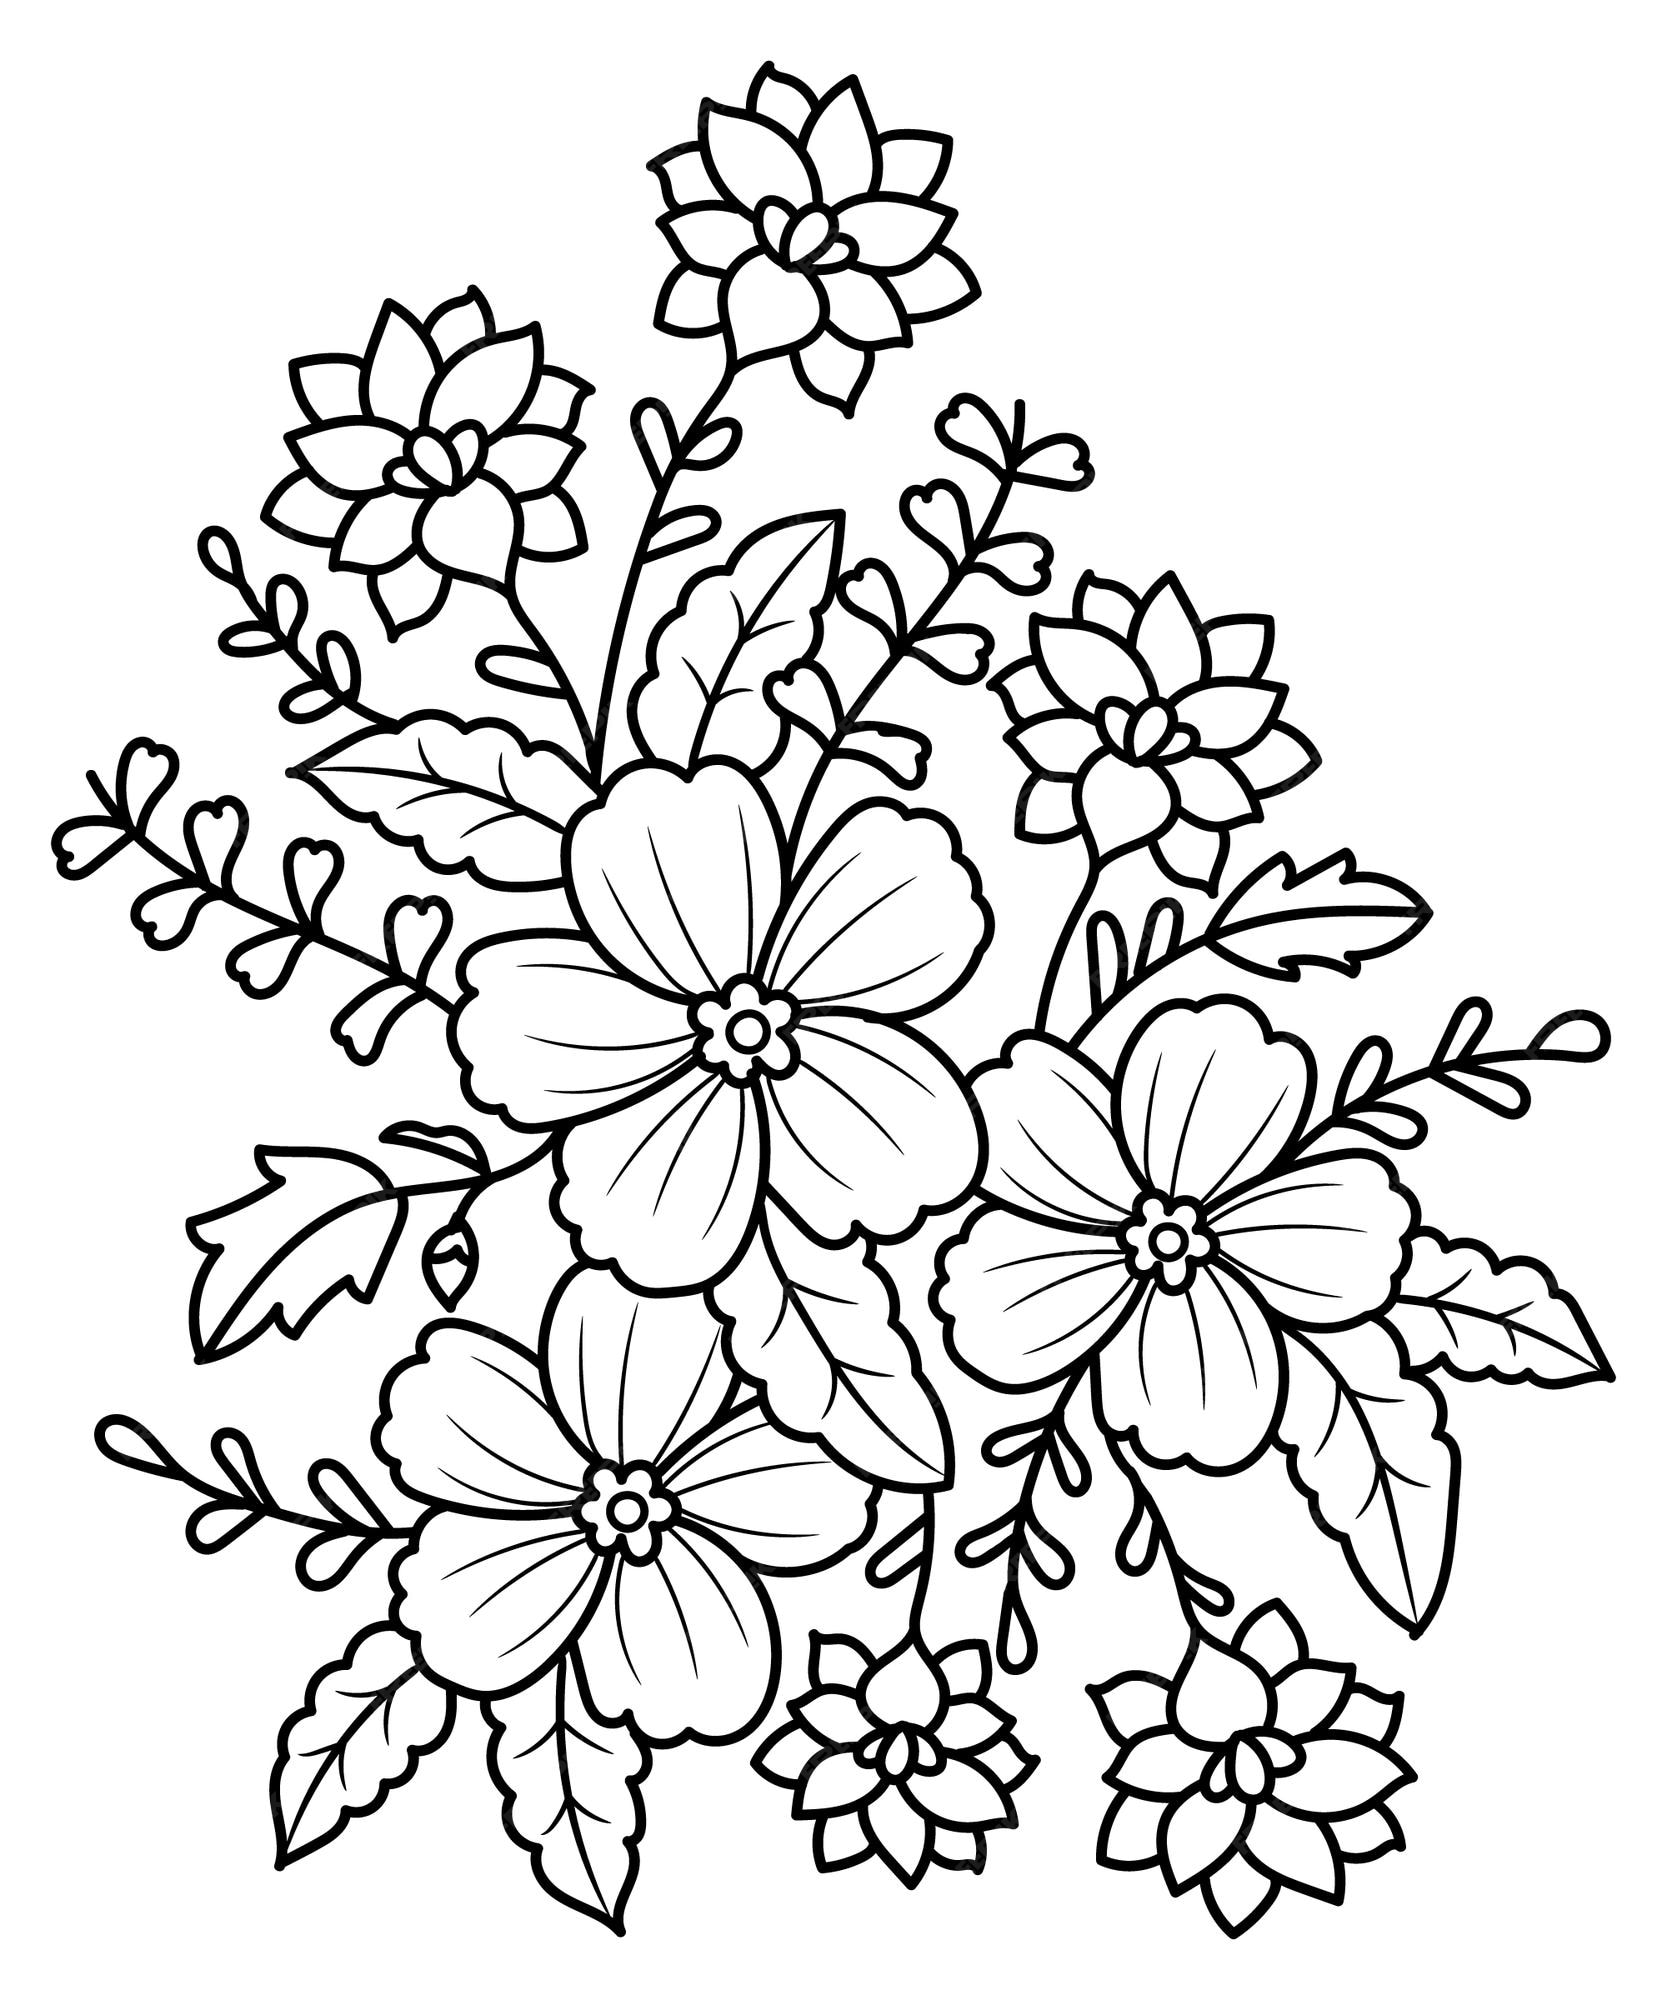 Premium vector flower bouquet coloring page for adults